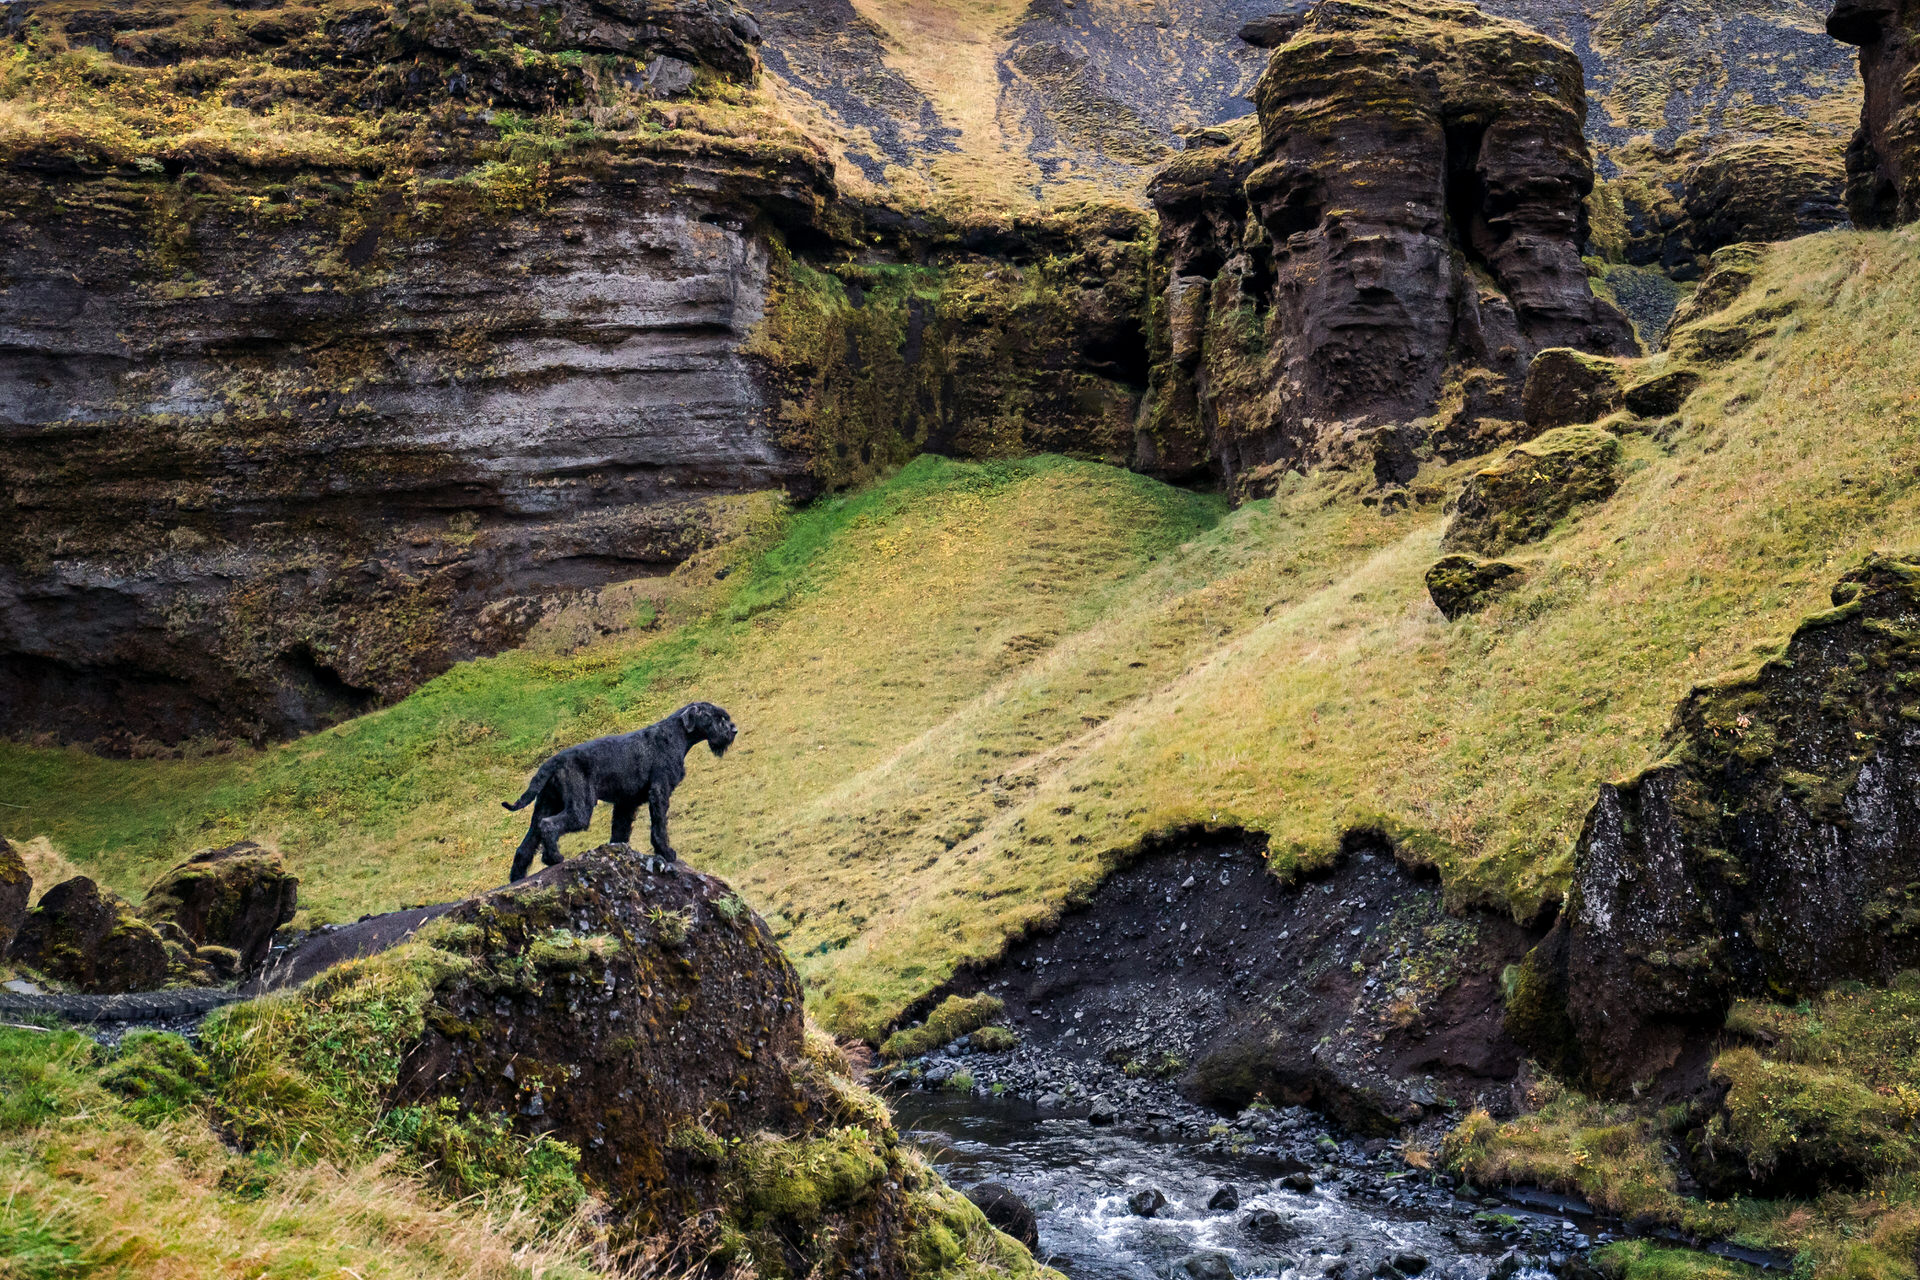 Dog on rock overlooking mossy canyon and stream in Iceland.